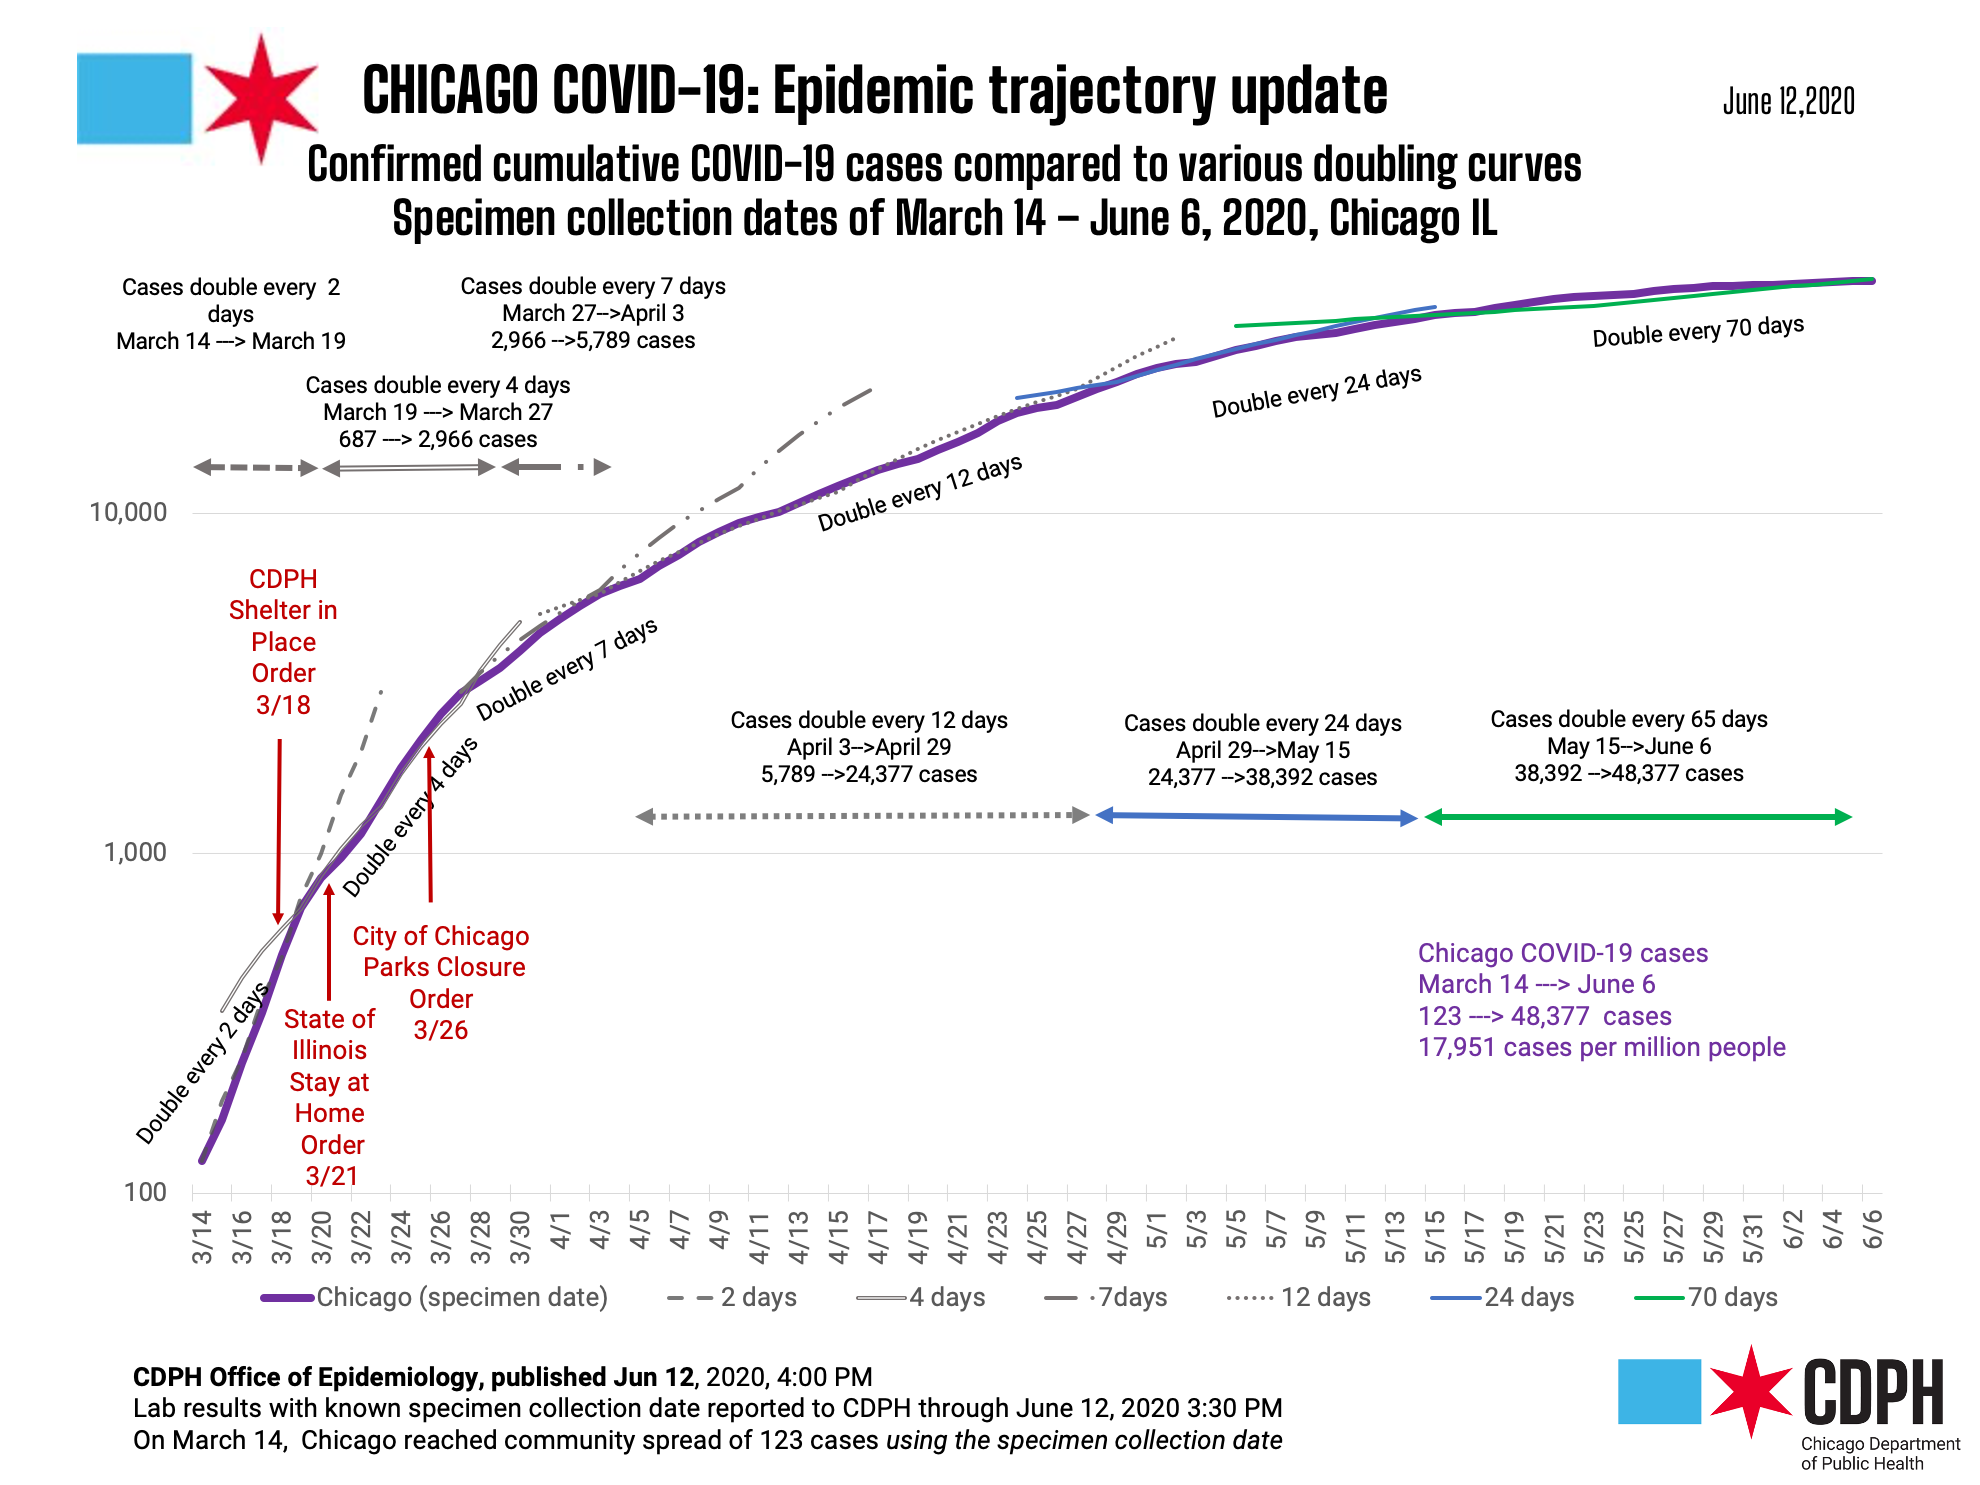 Chicago COVID Epidemic Trajectory Update